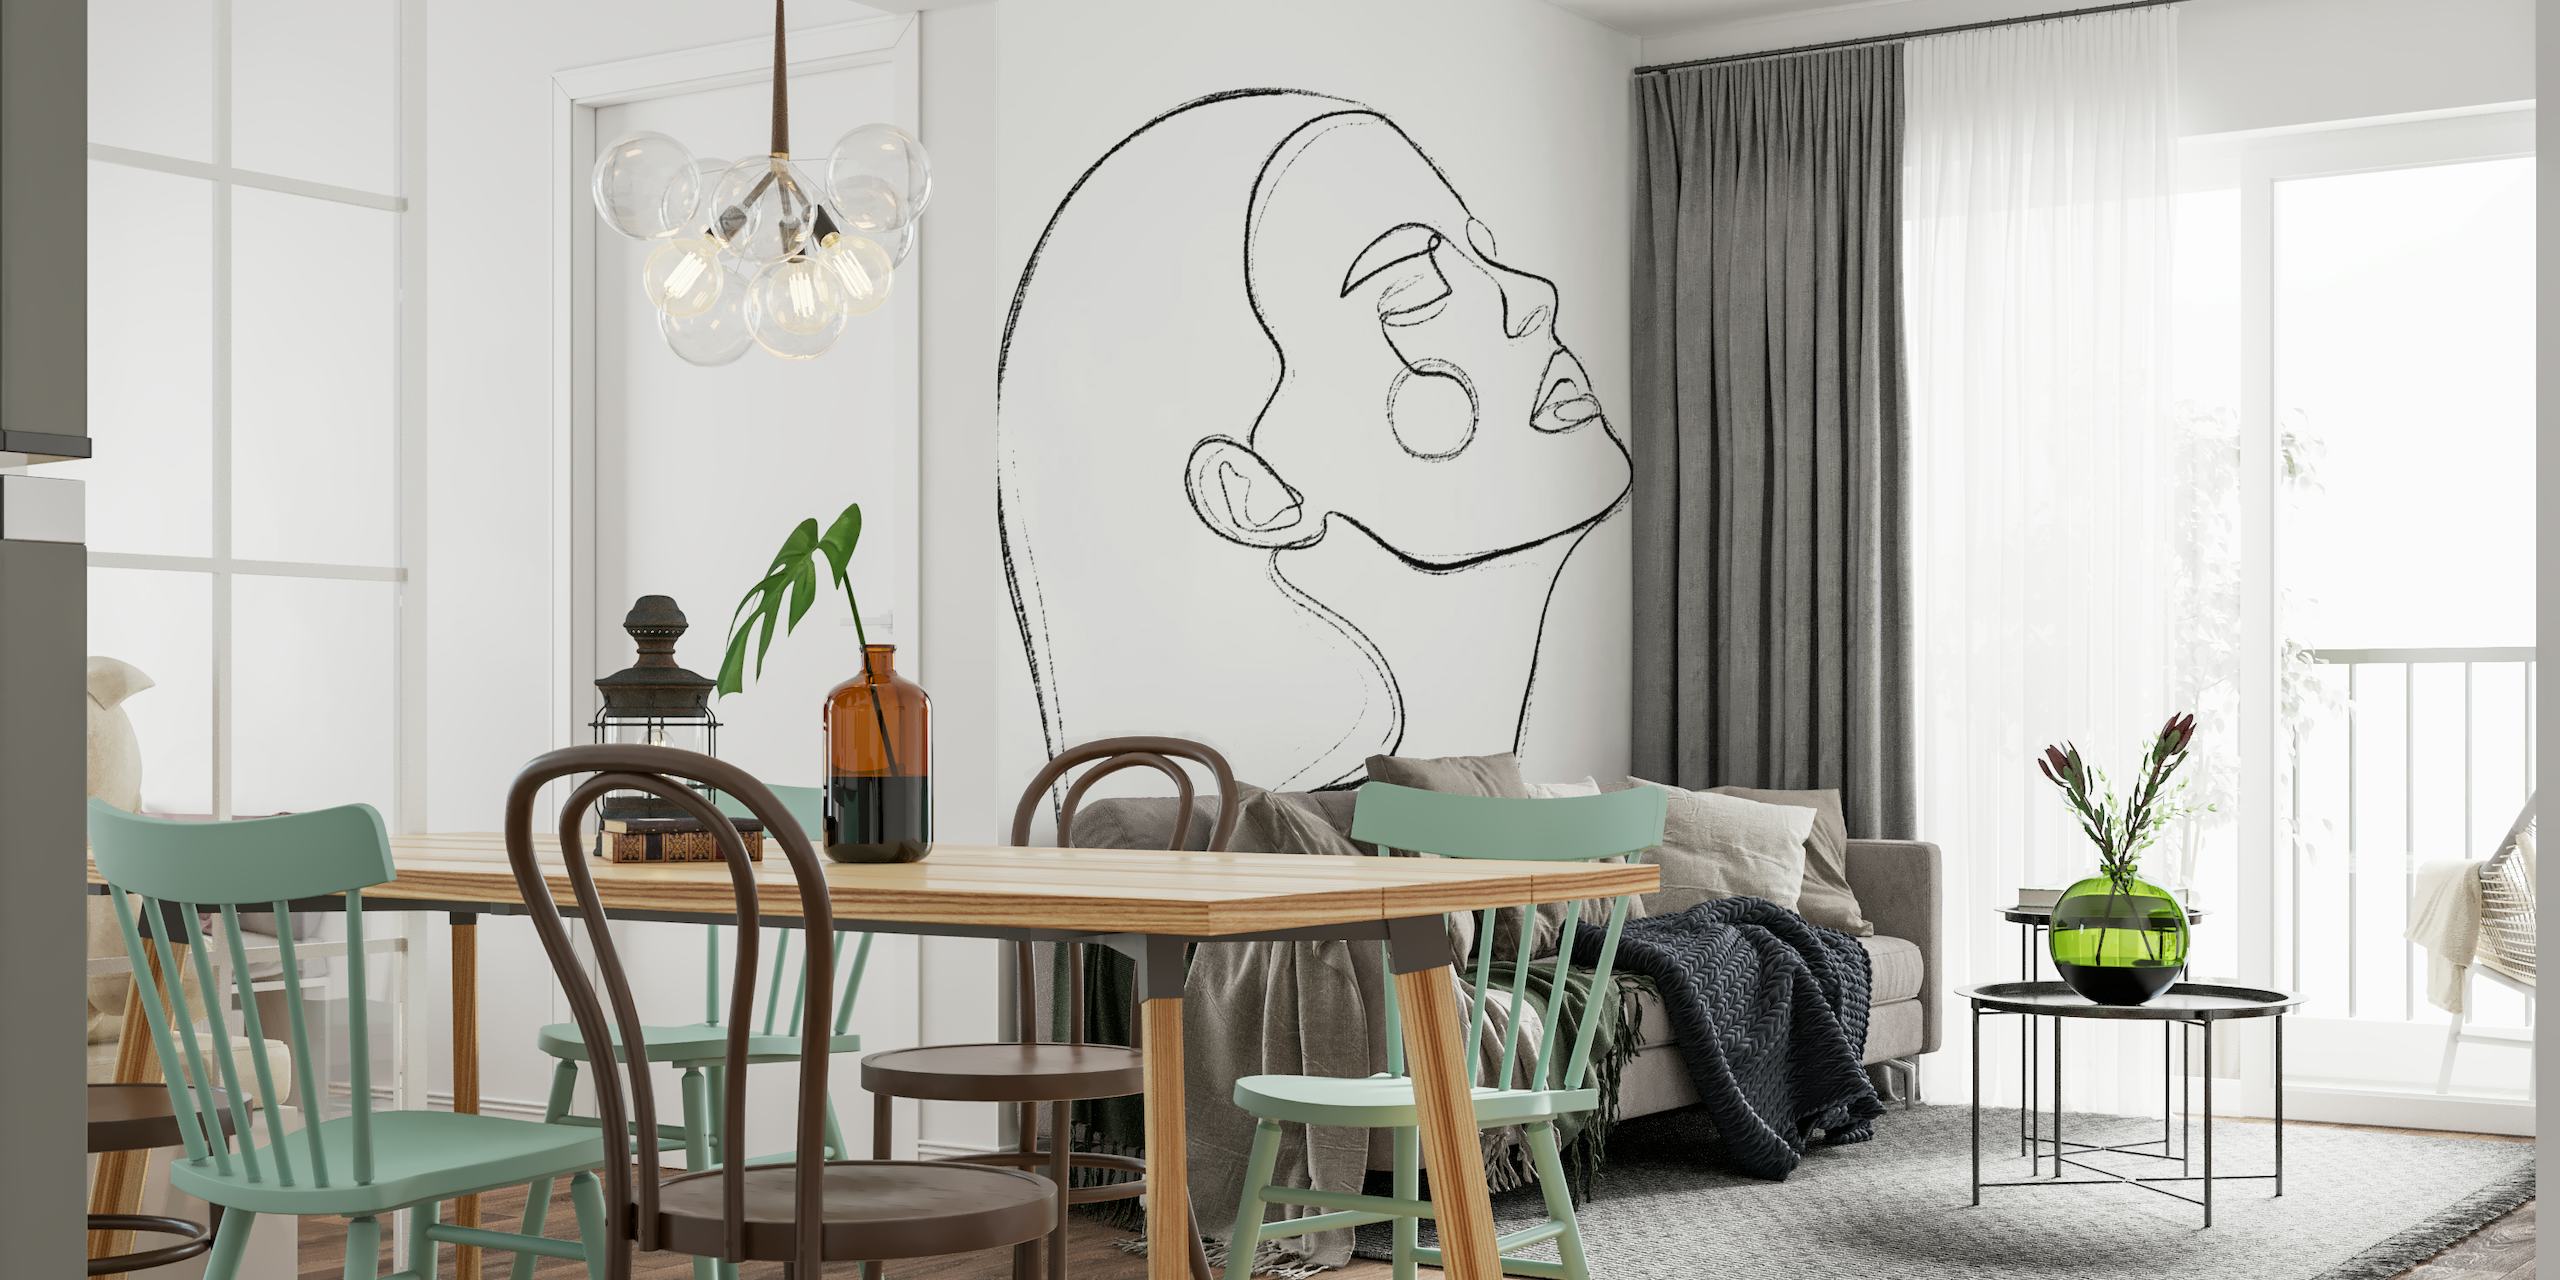 Sketch-style wall mural of a person in profile conveying sensuality and warmth, named 'The Heat'.